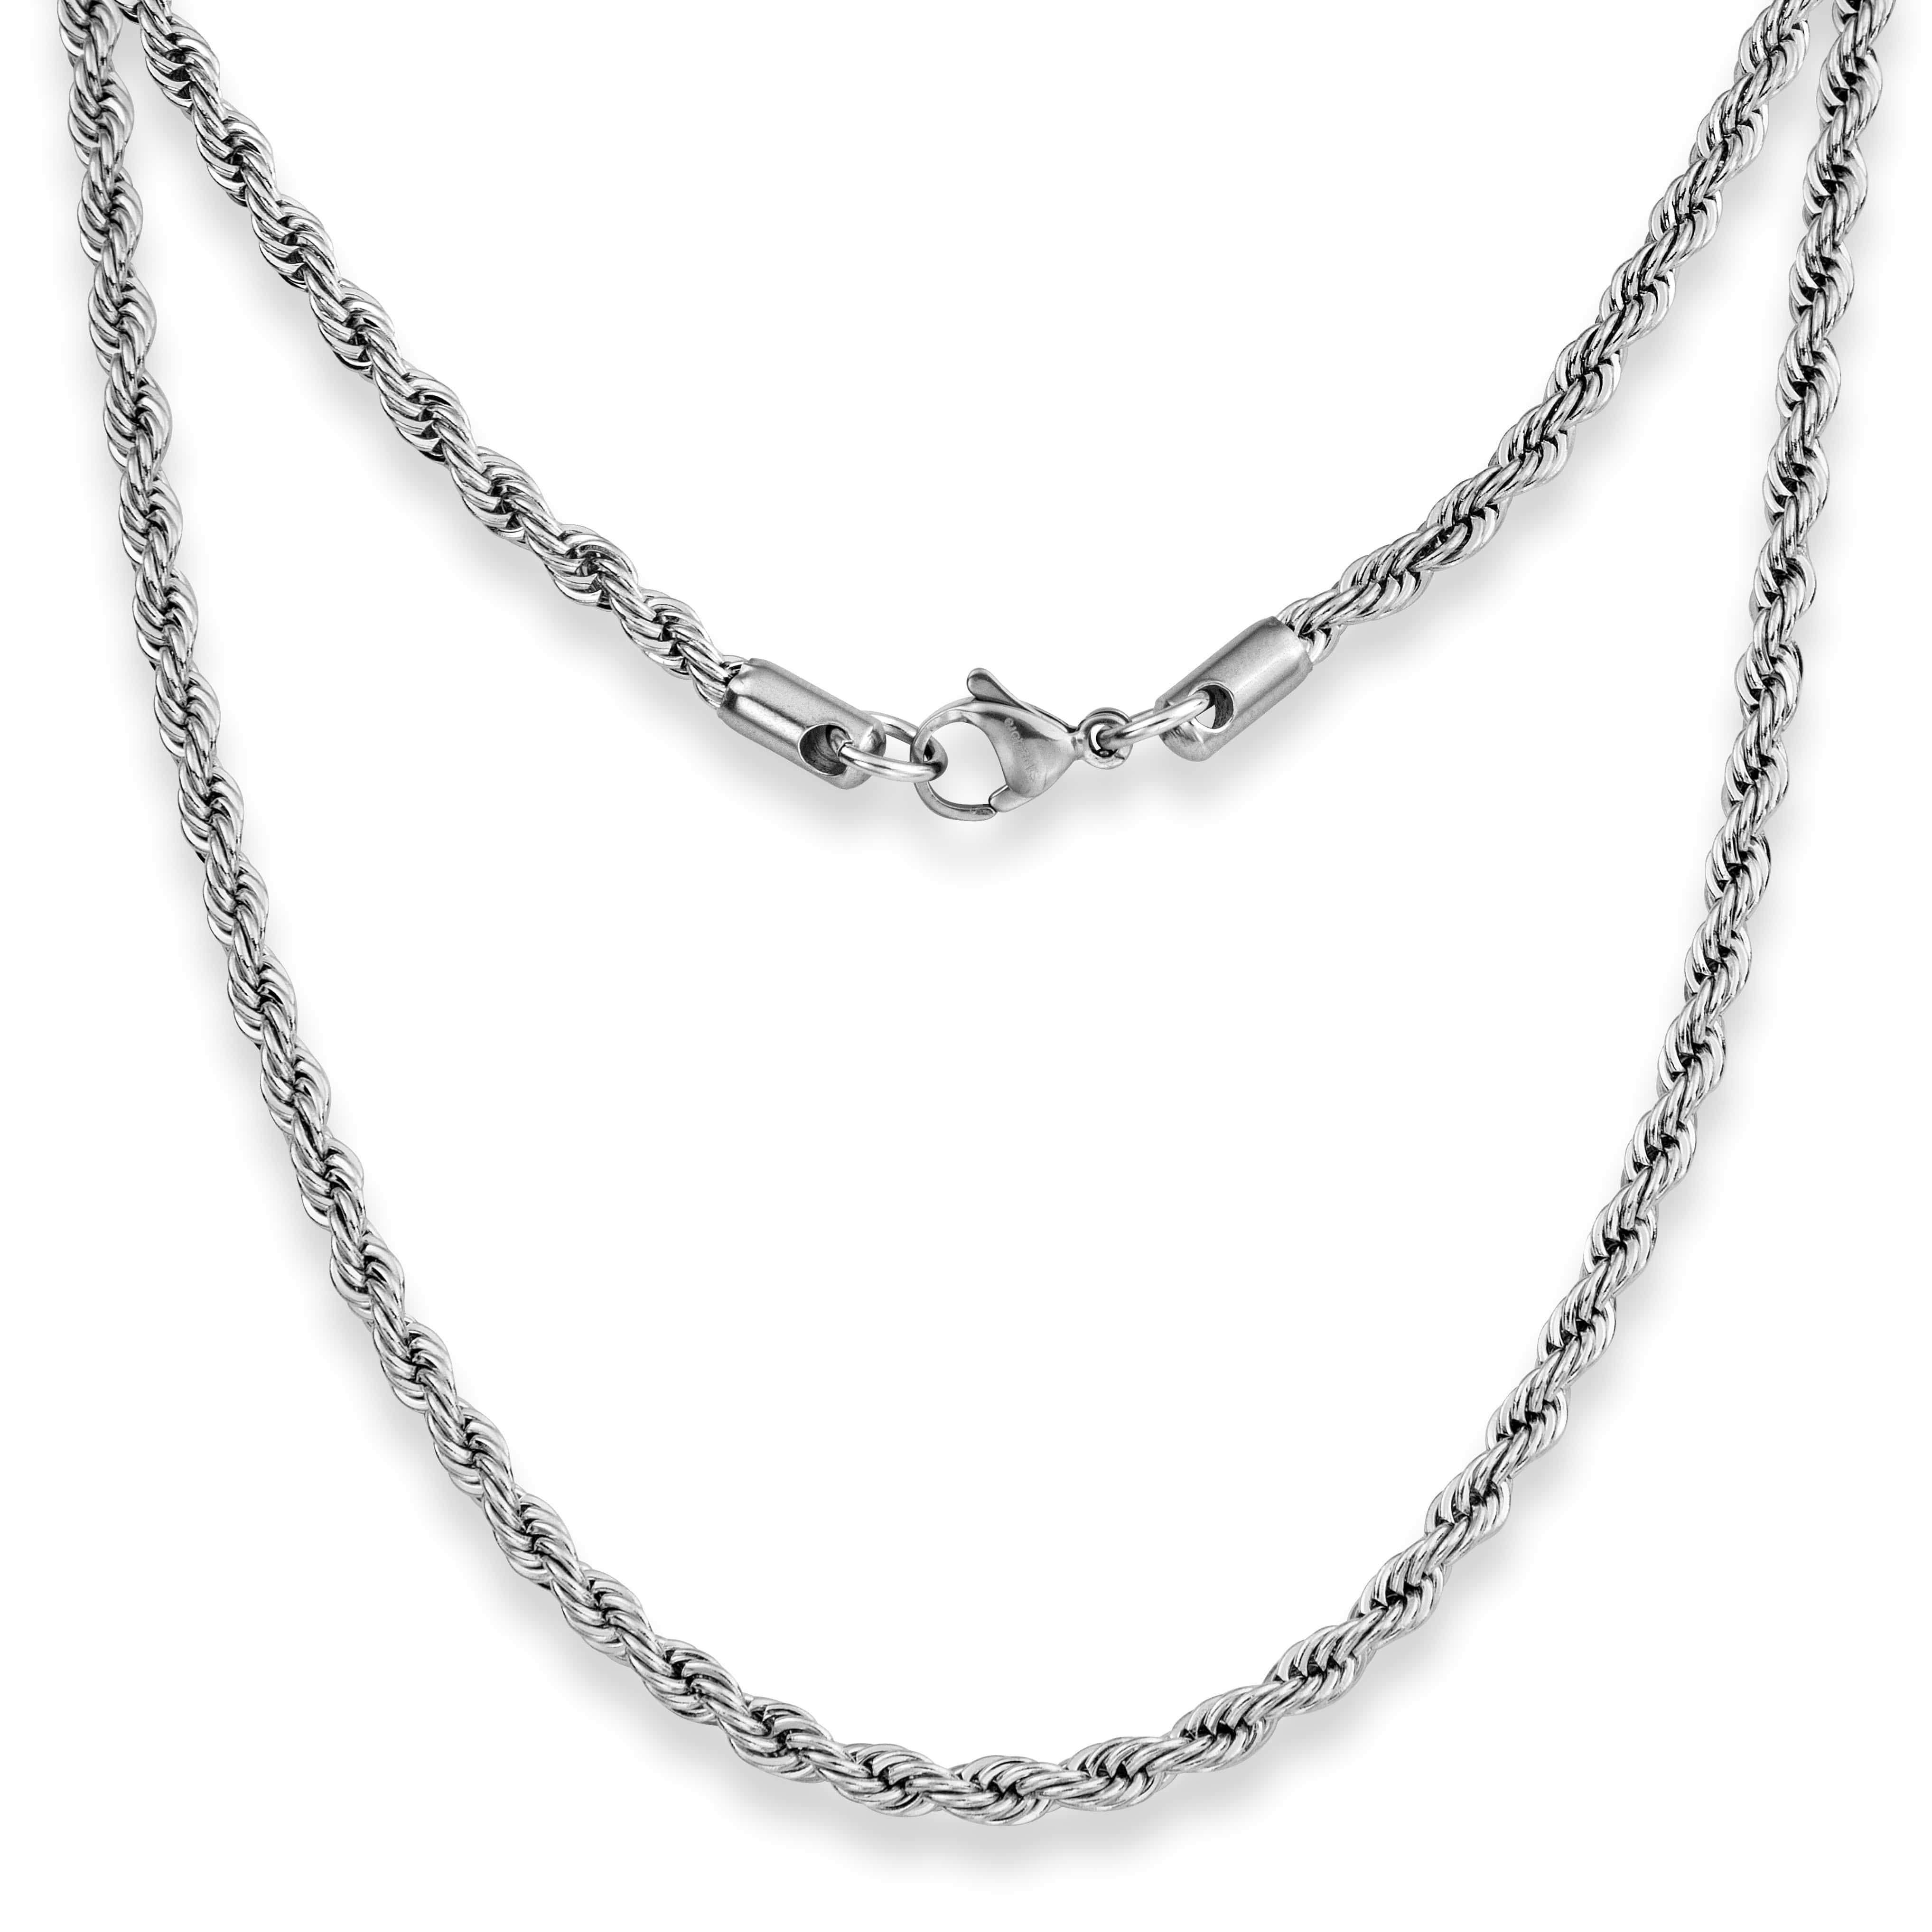 Mens Silver Rope Chain - Silver Chain Necklace - Stainless Steel